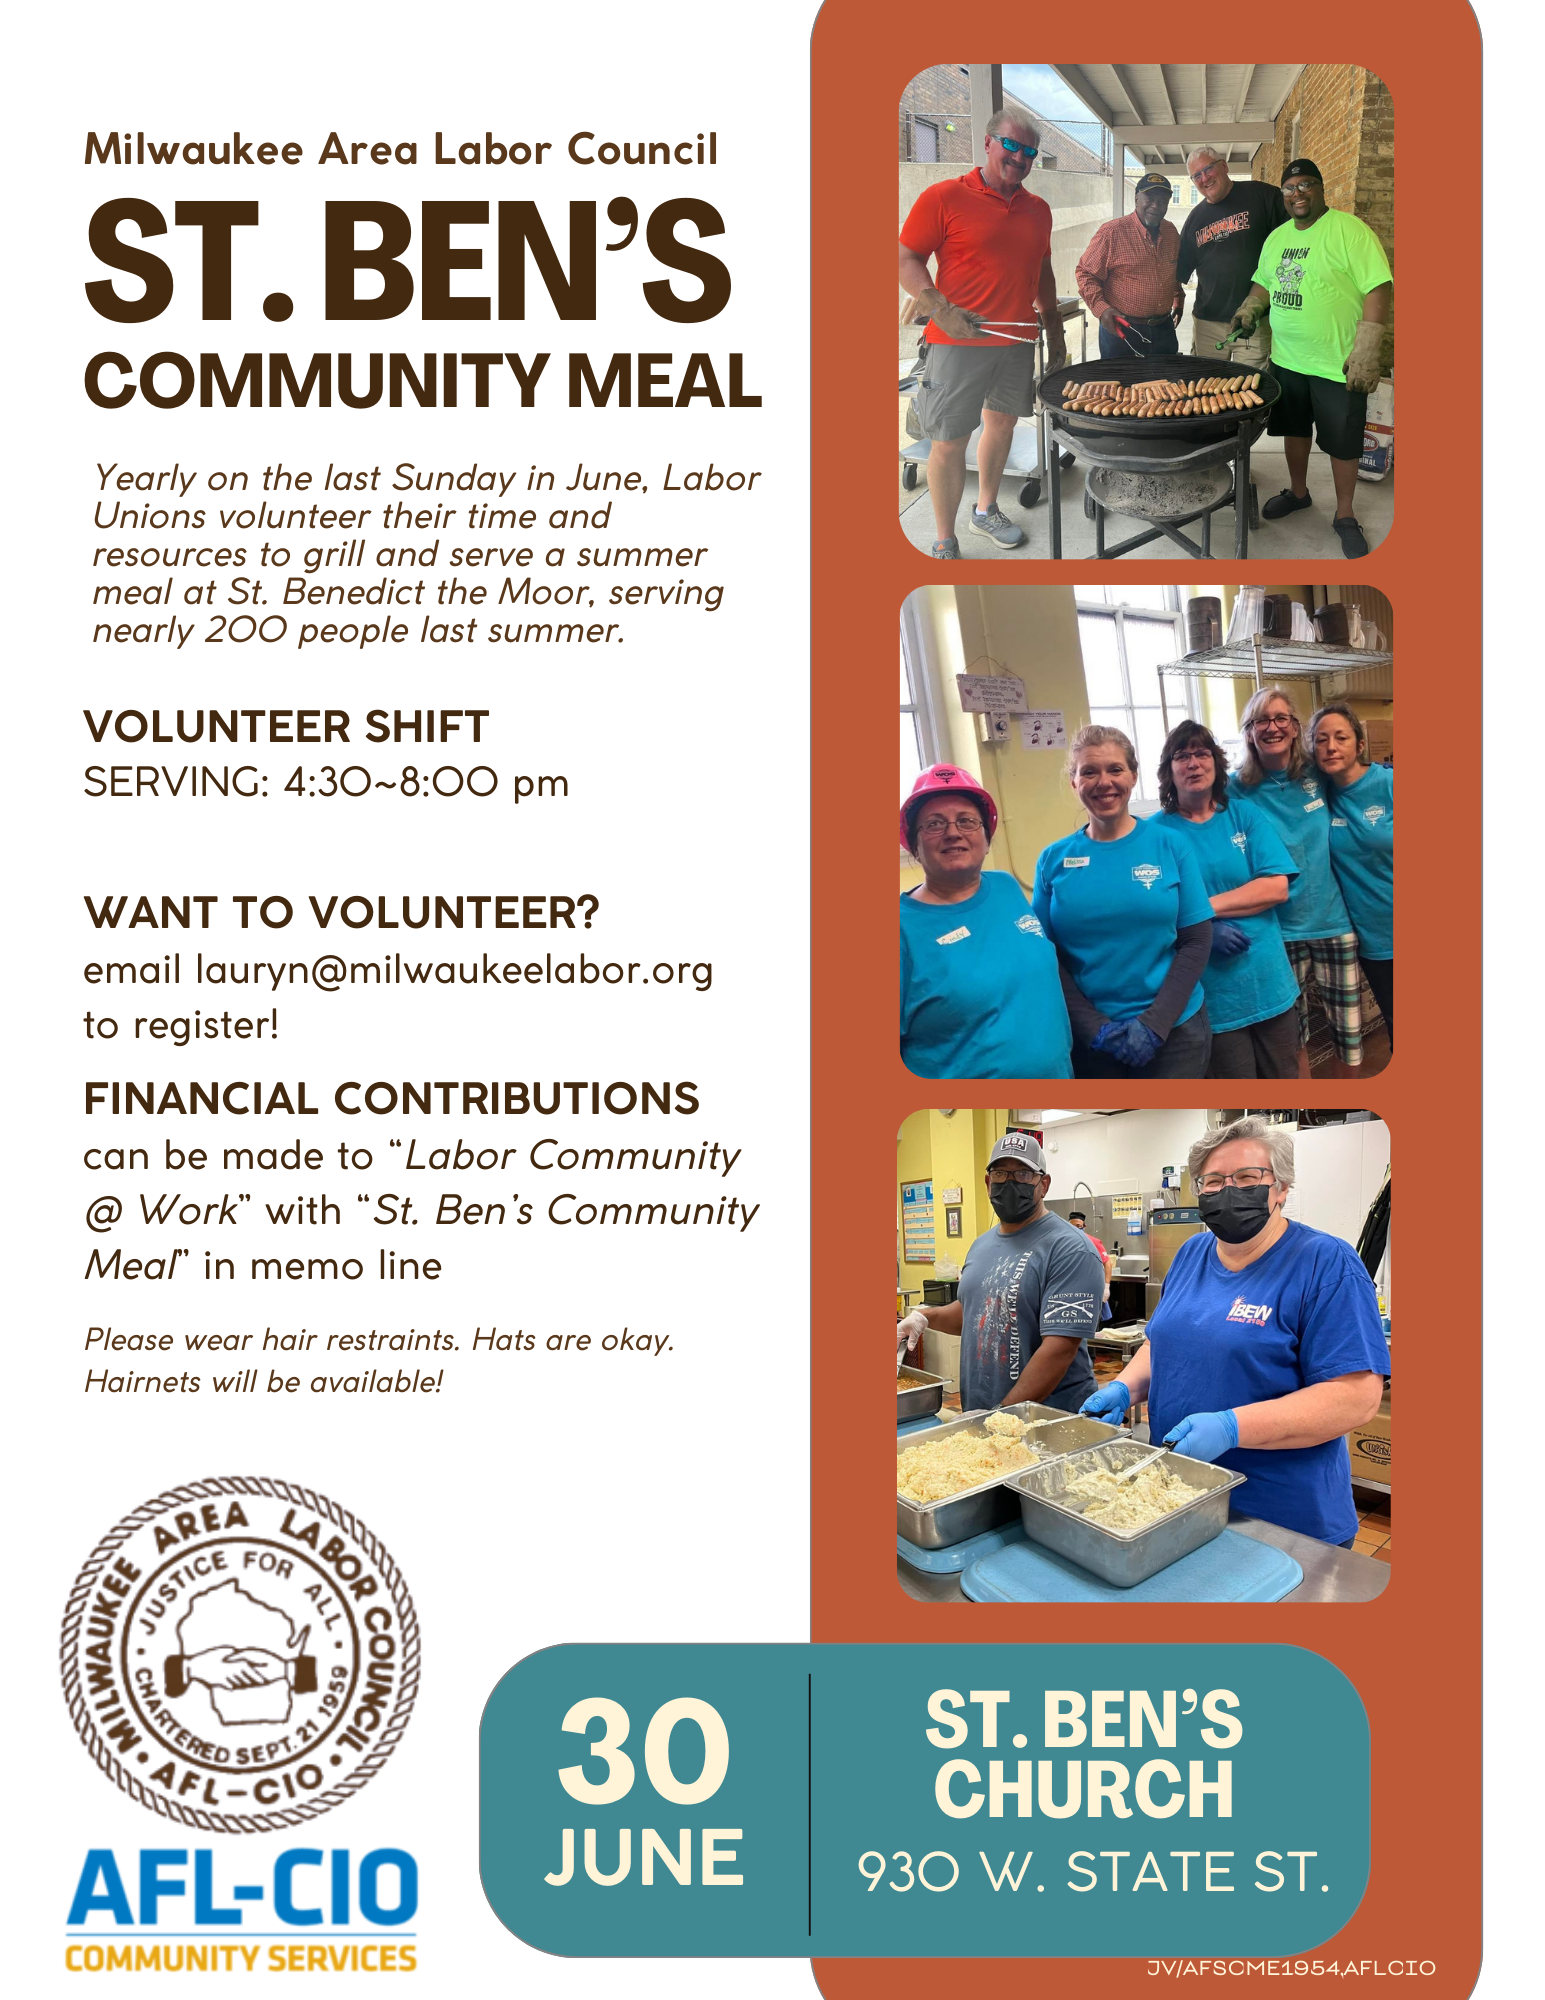 St. Ben’s Community Meal Cookout